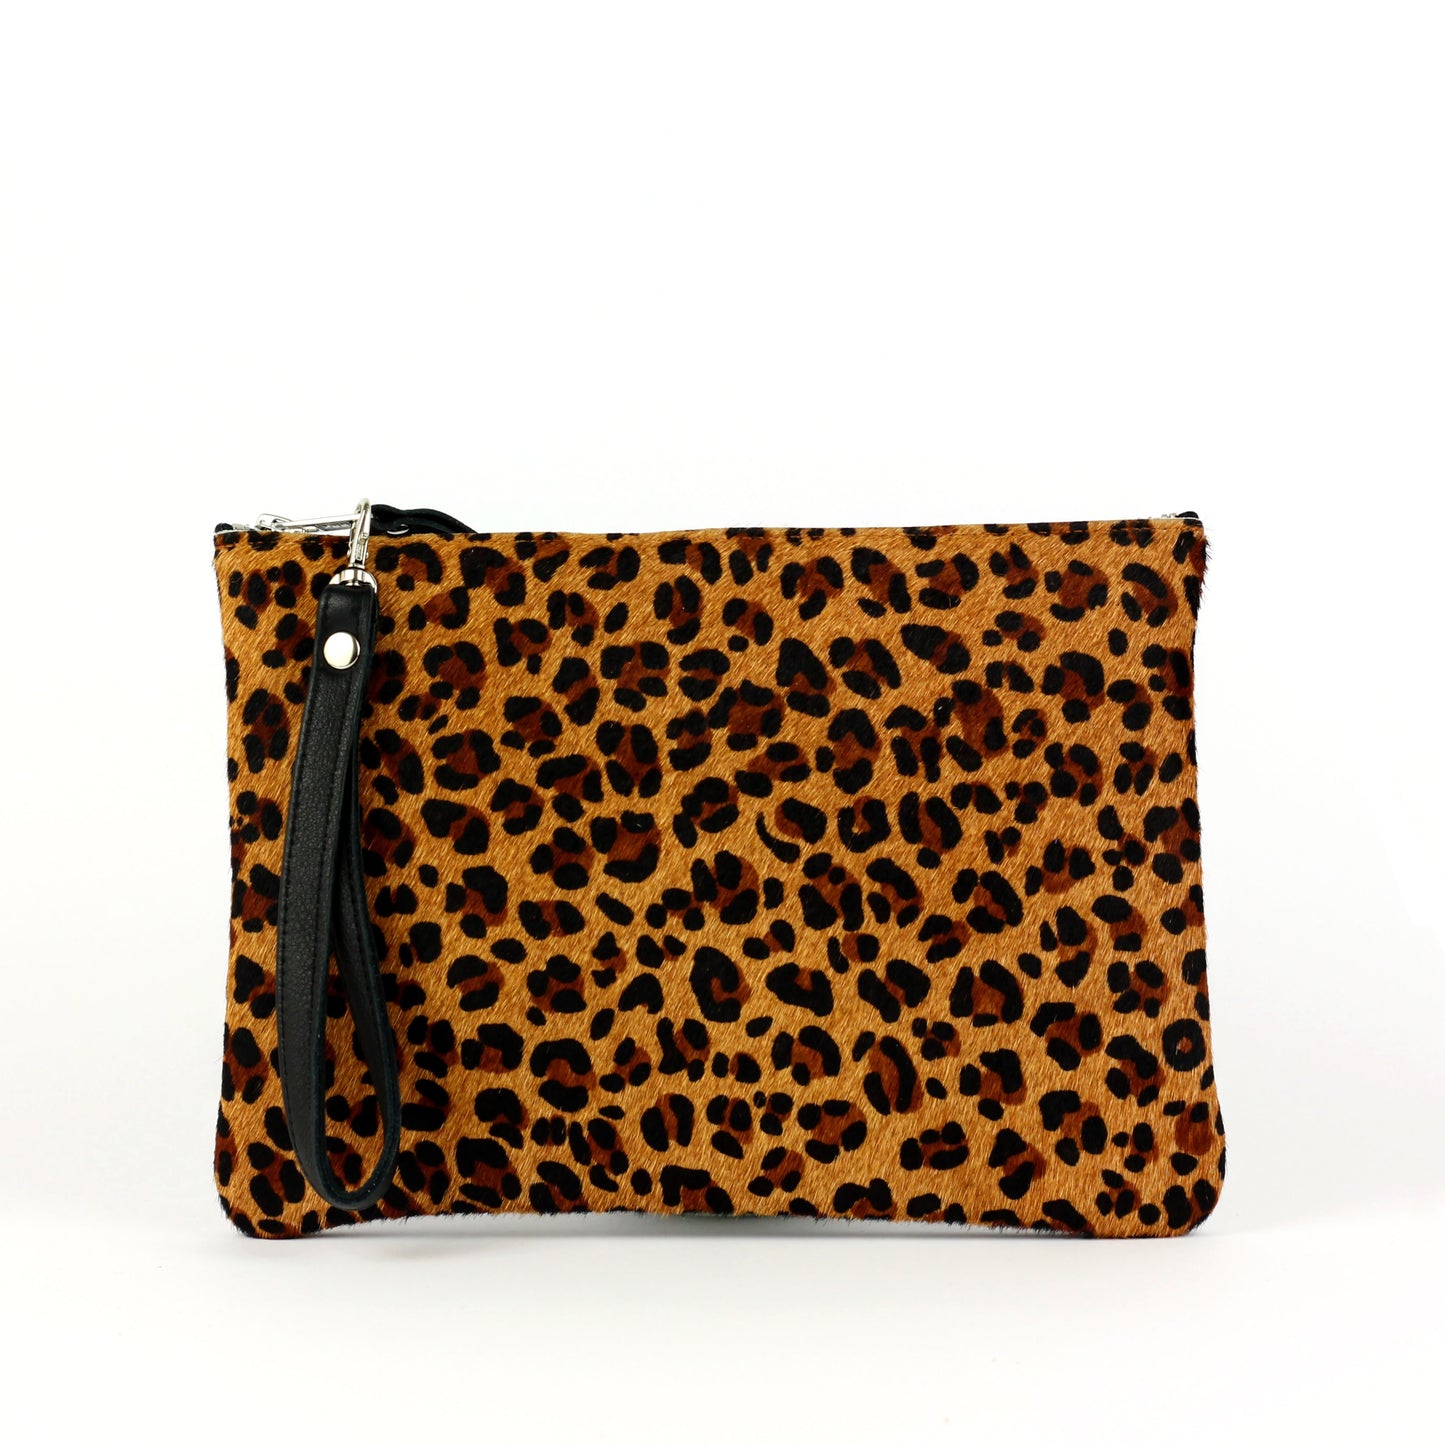 Leopard Leather Clutch